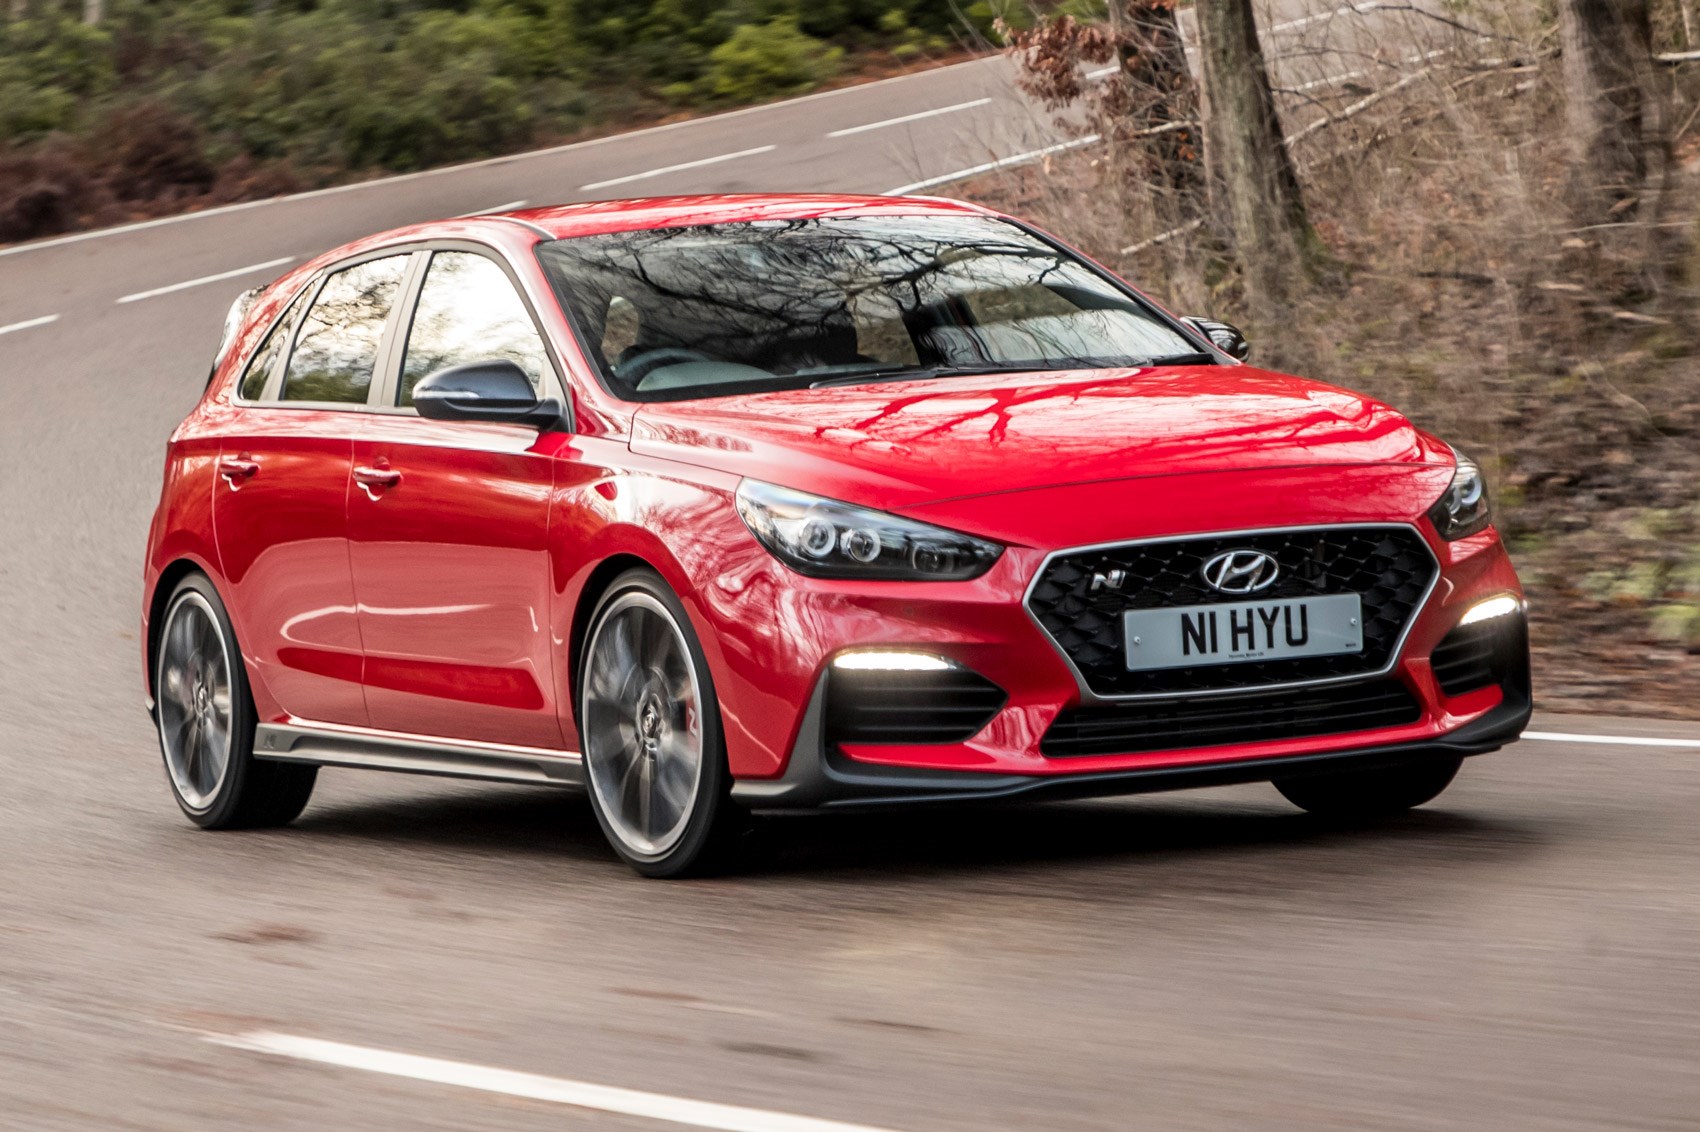 Hyundai i30 Fastback (2020) - pictures, information & specs